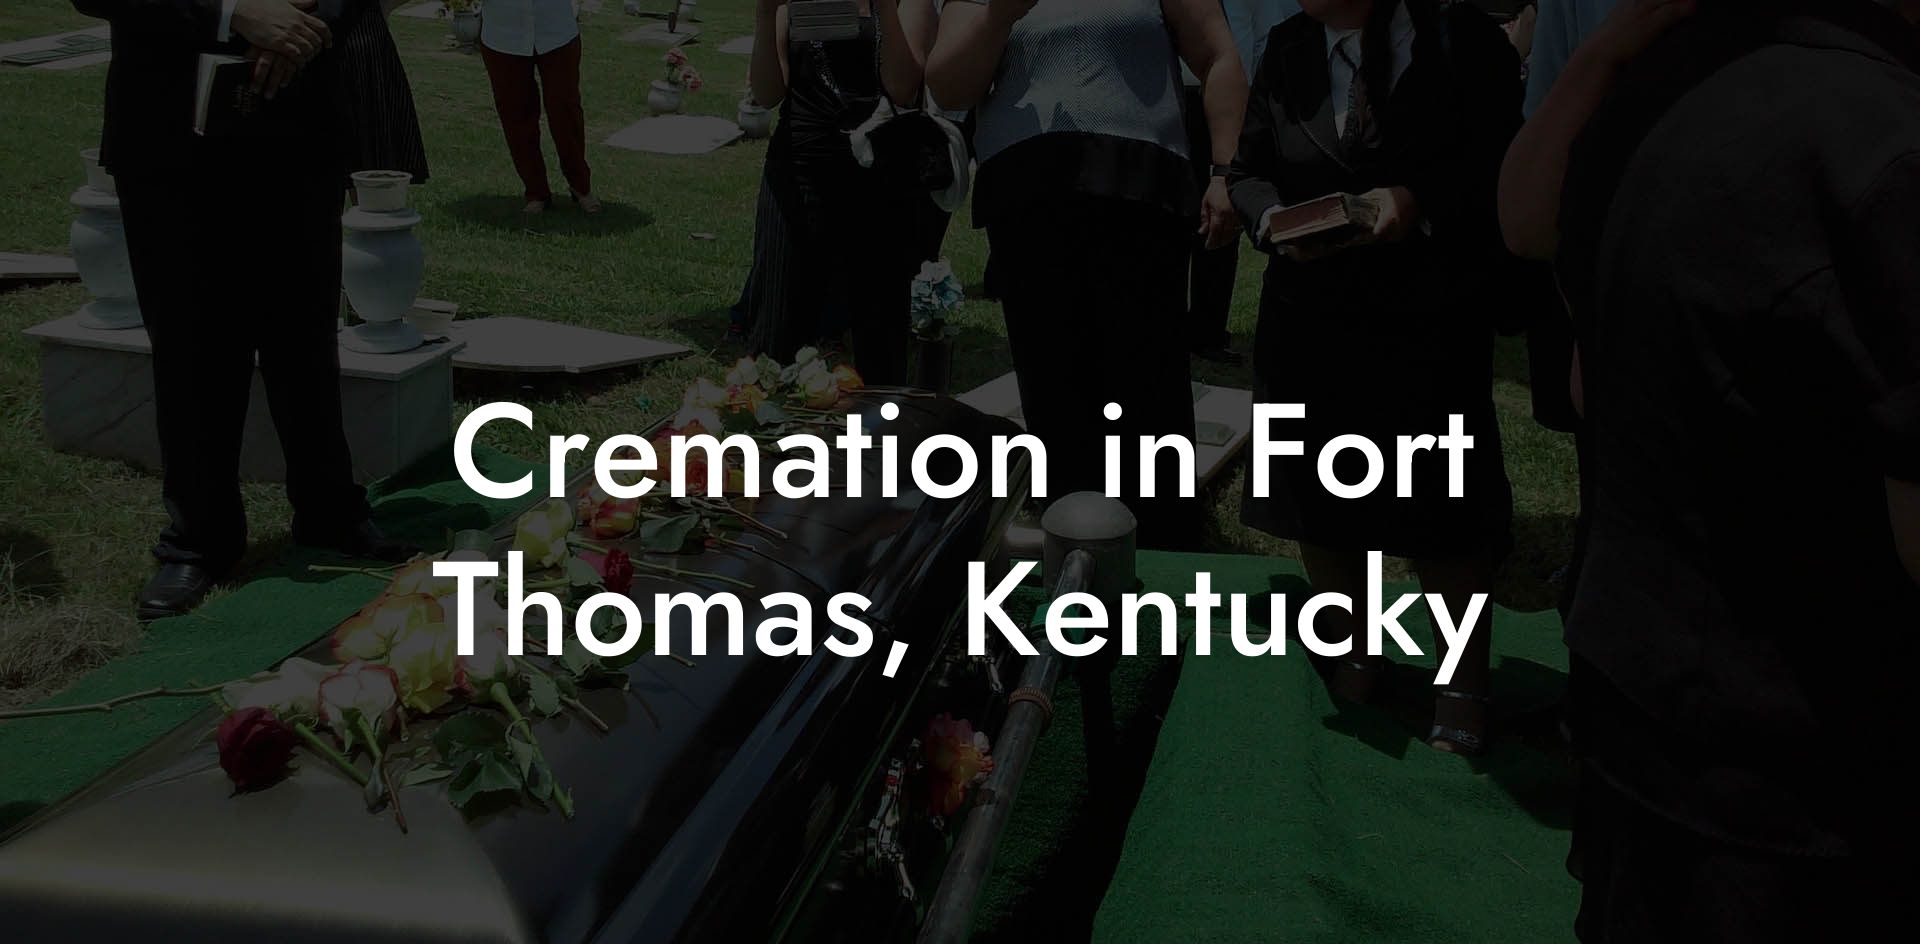 Cremation in Fort Thomas, Kentucky